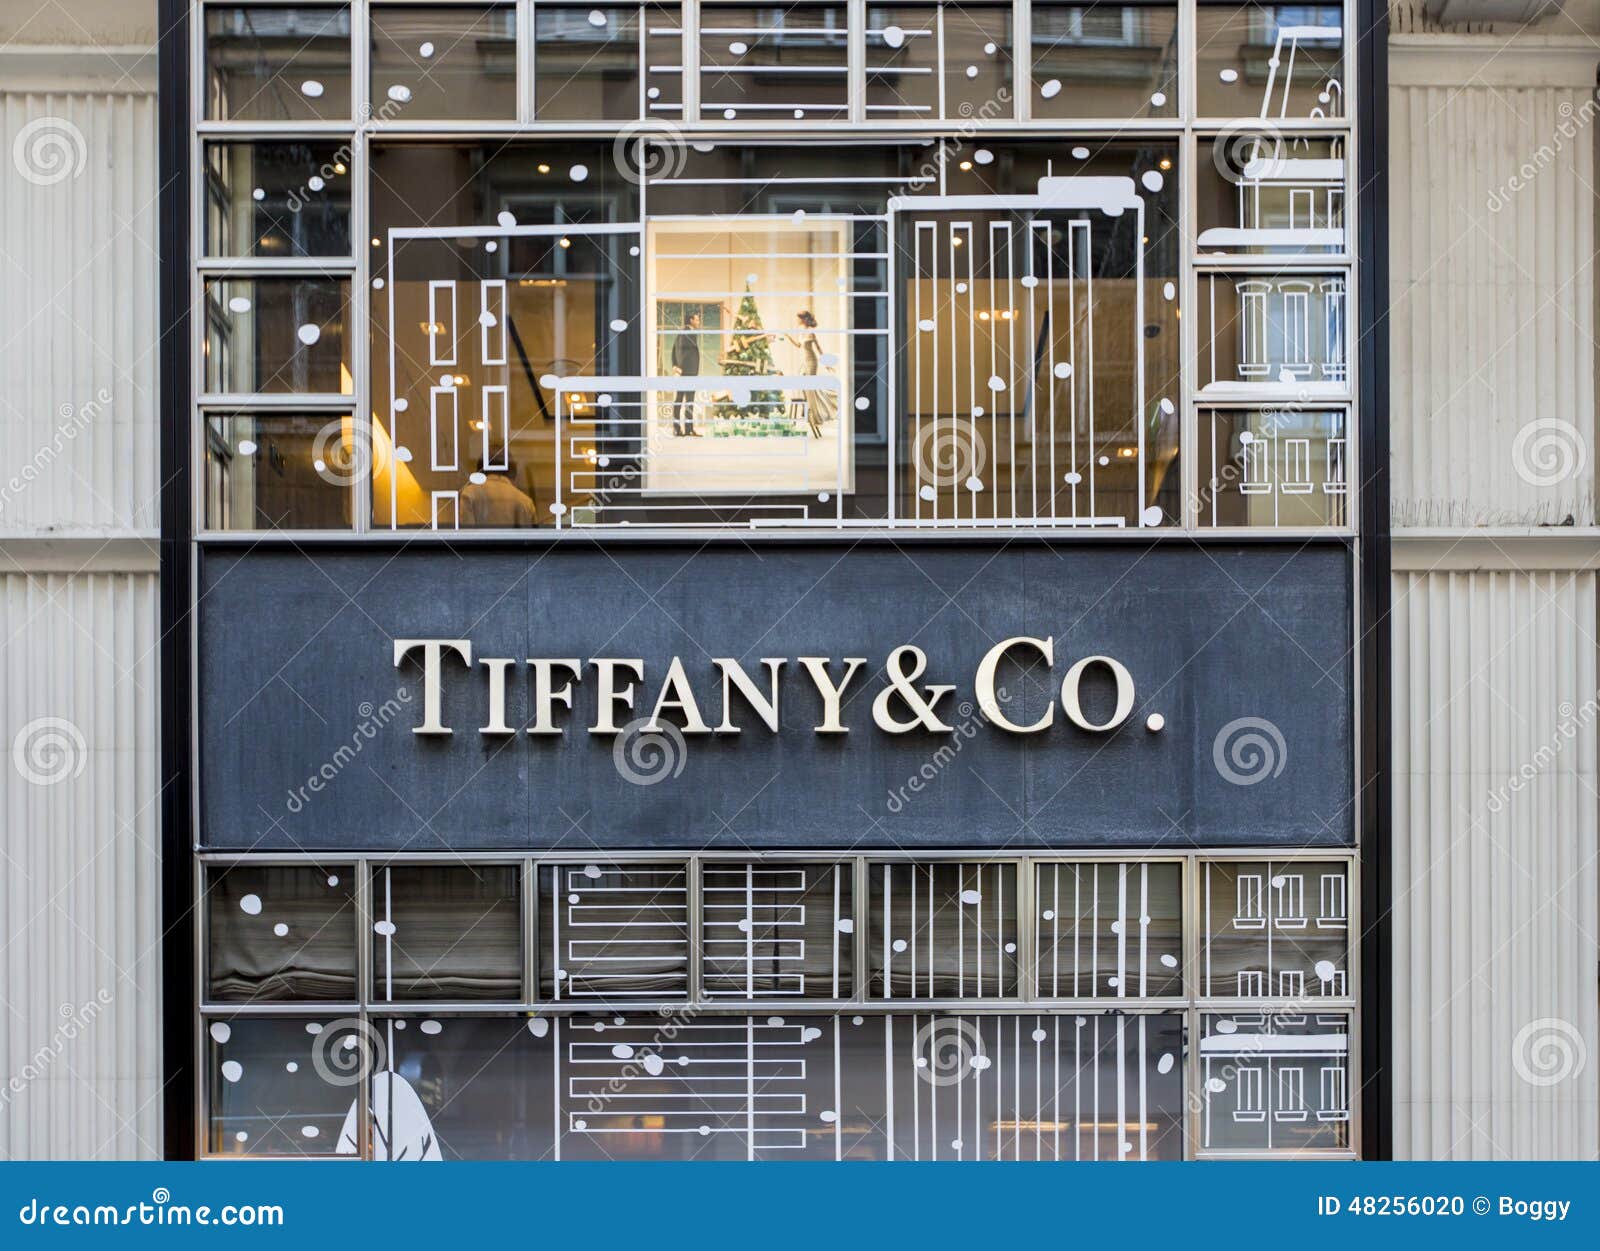 tiffany and co founded